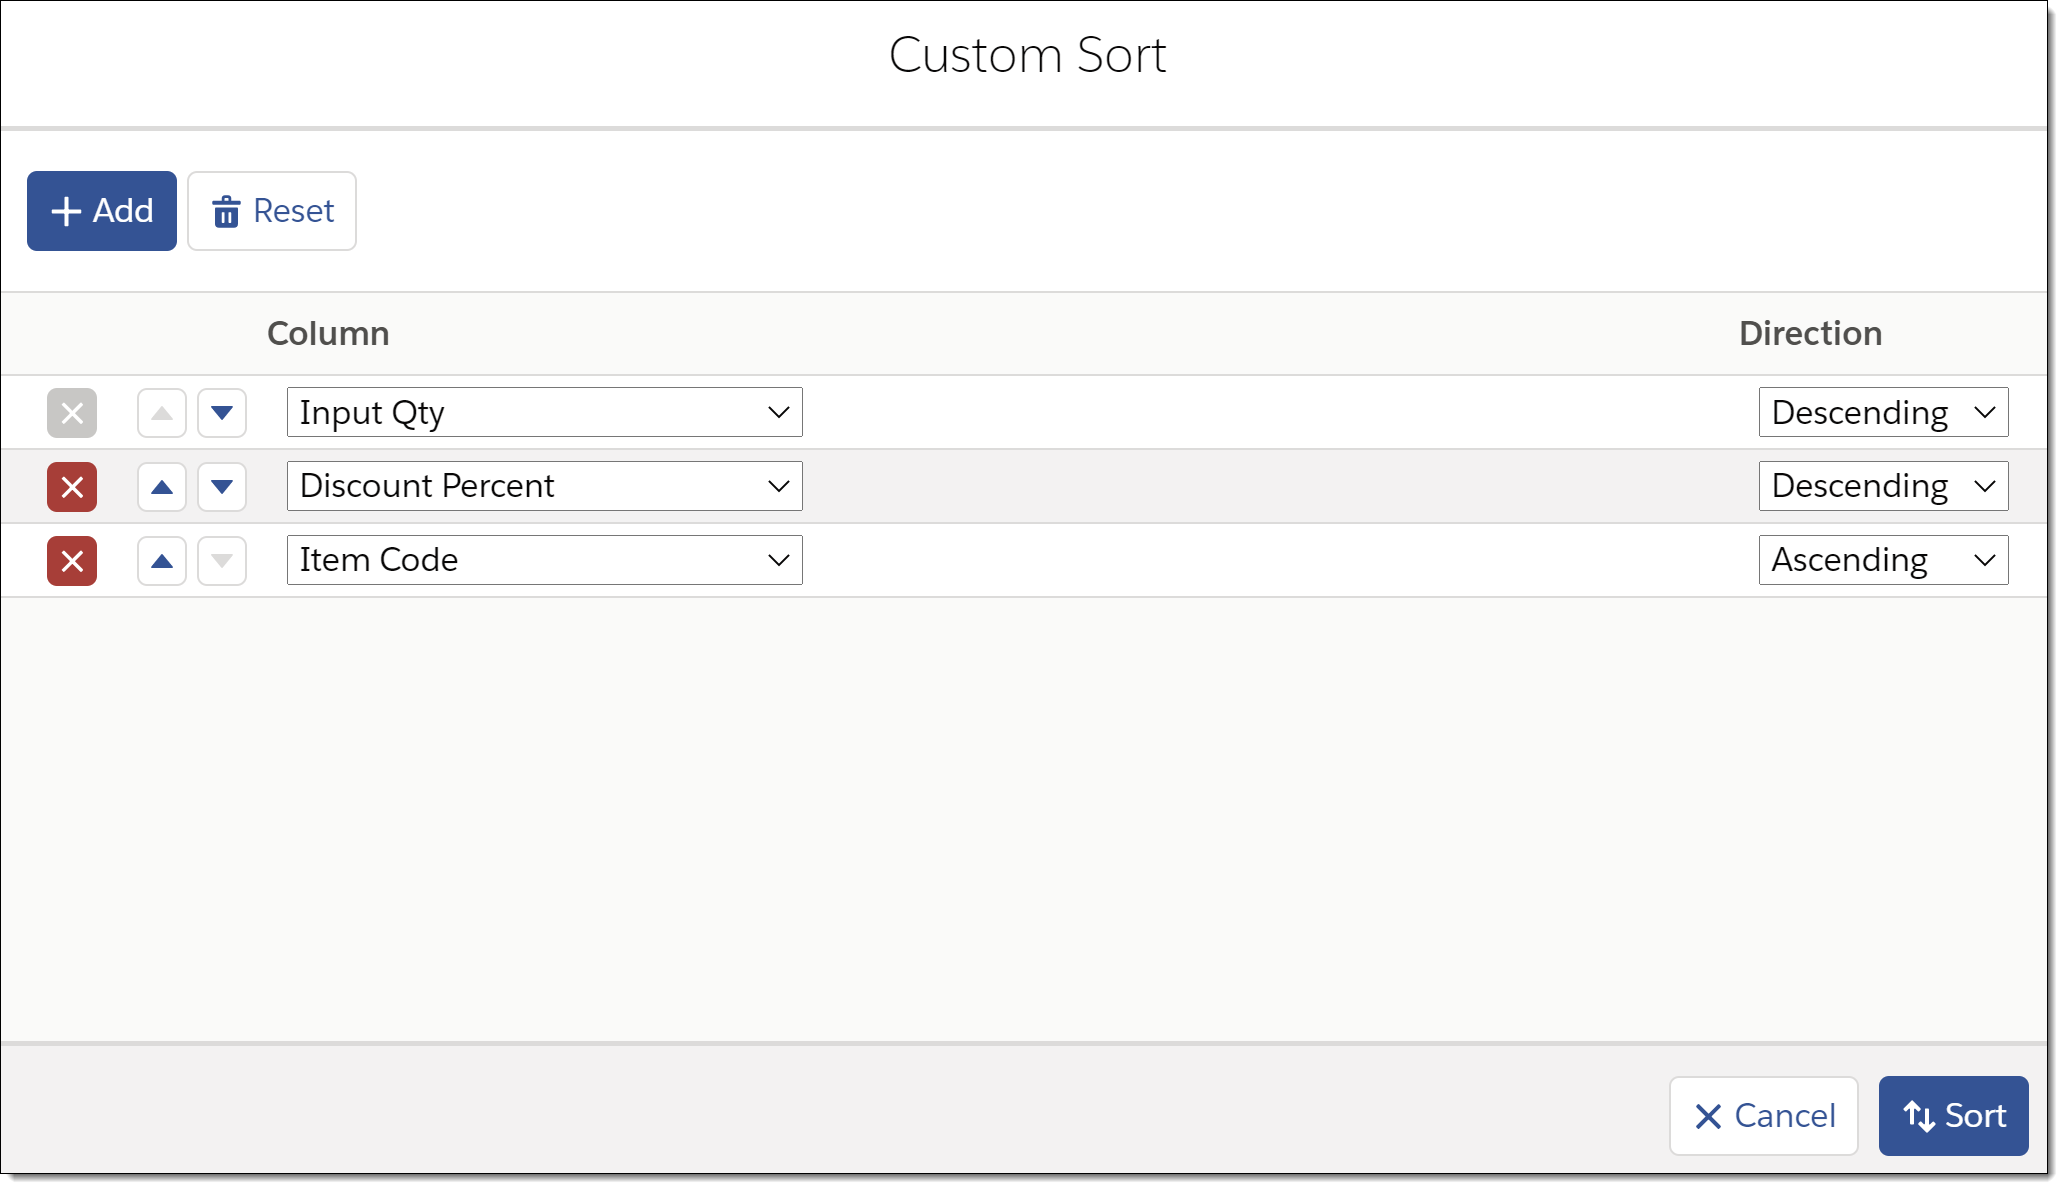 Example of the Custom Sort screen for working with multiple column sort